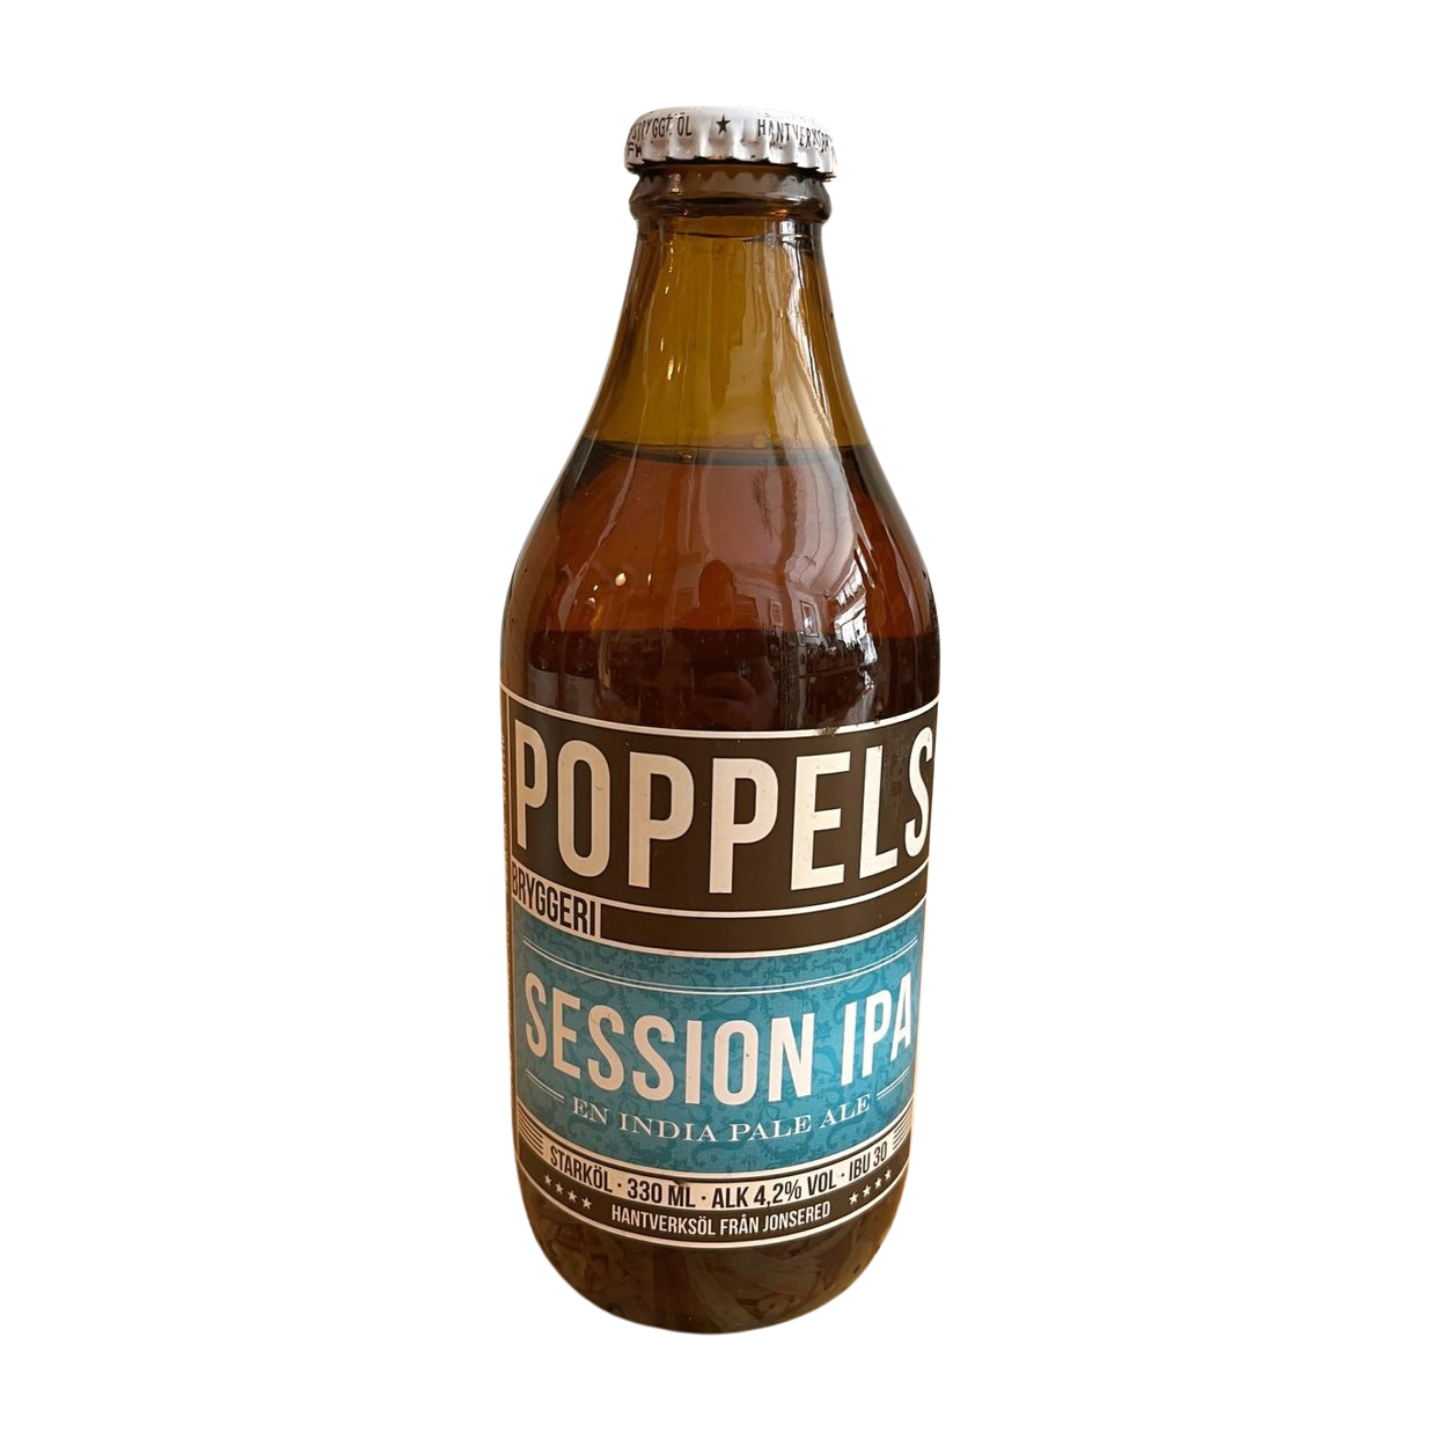 Poppels - Session IPA - Beer - 33cl